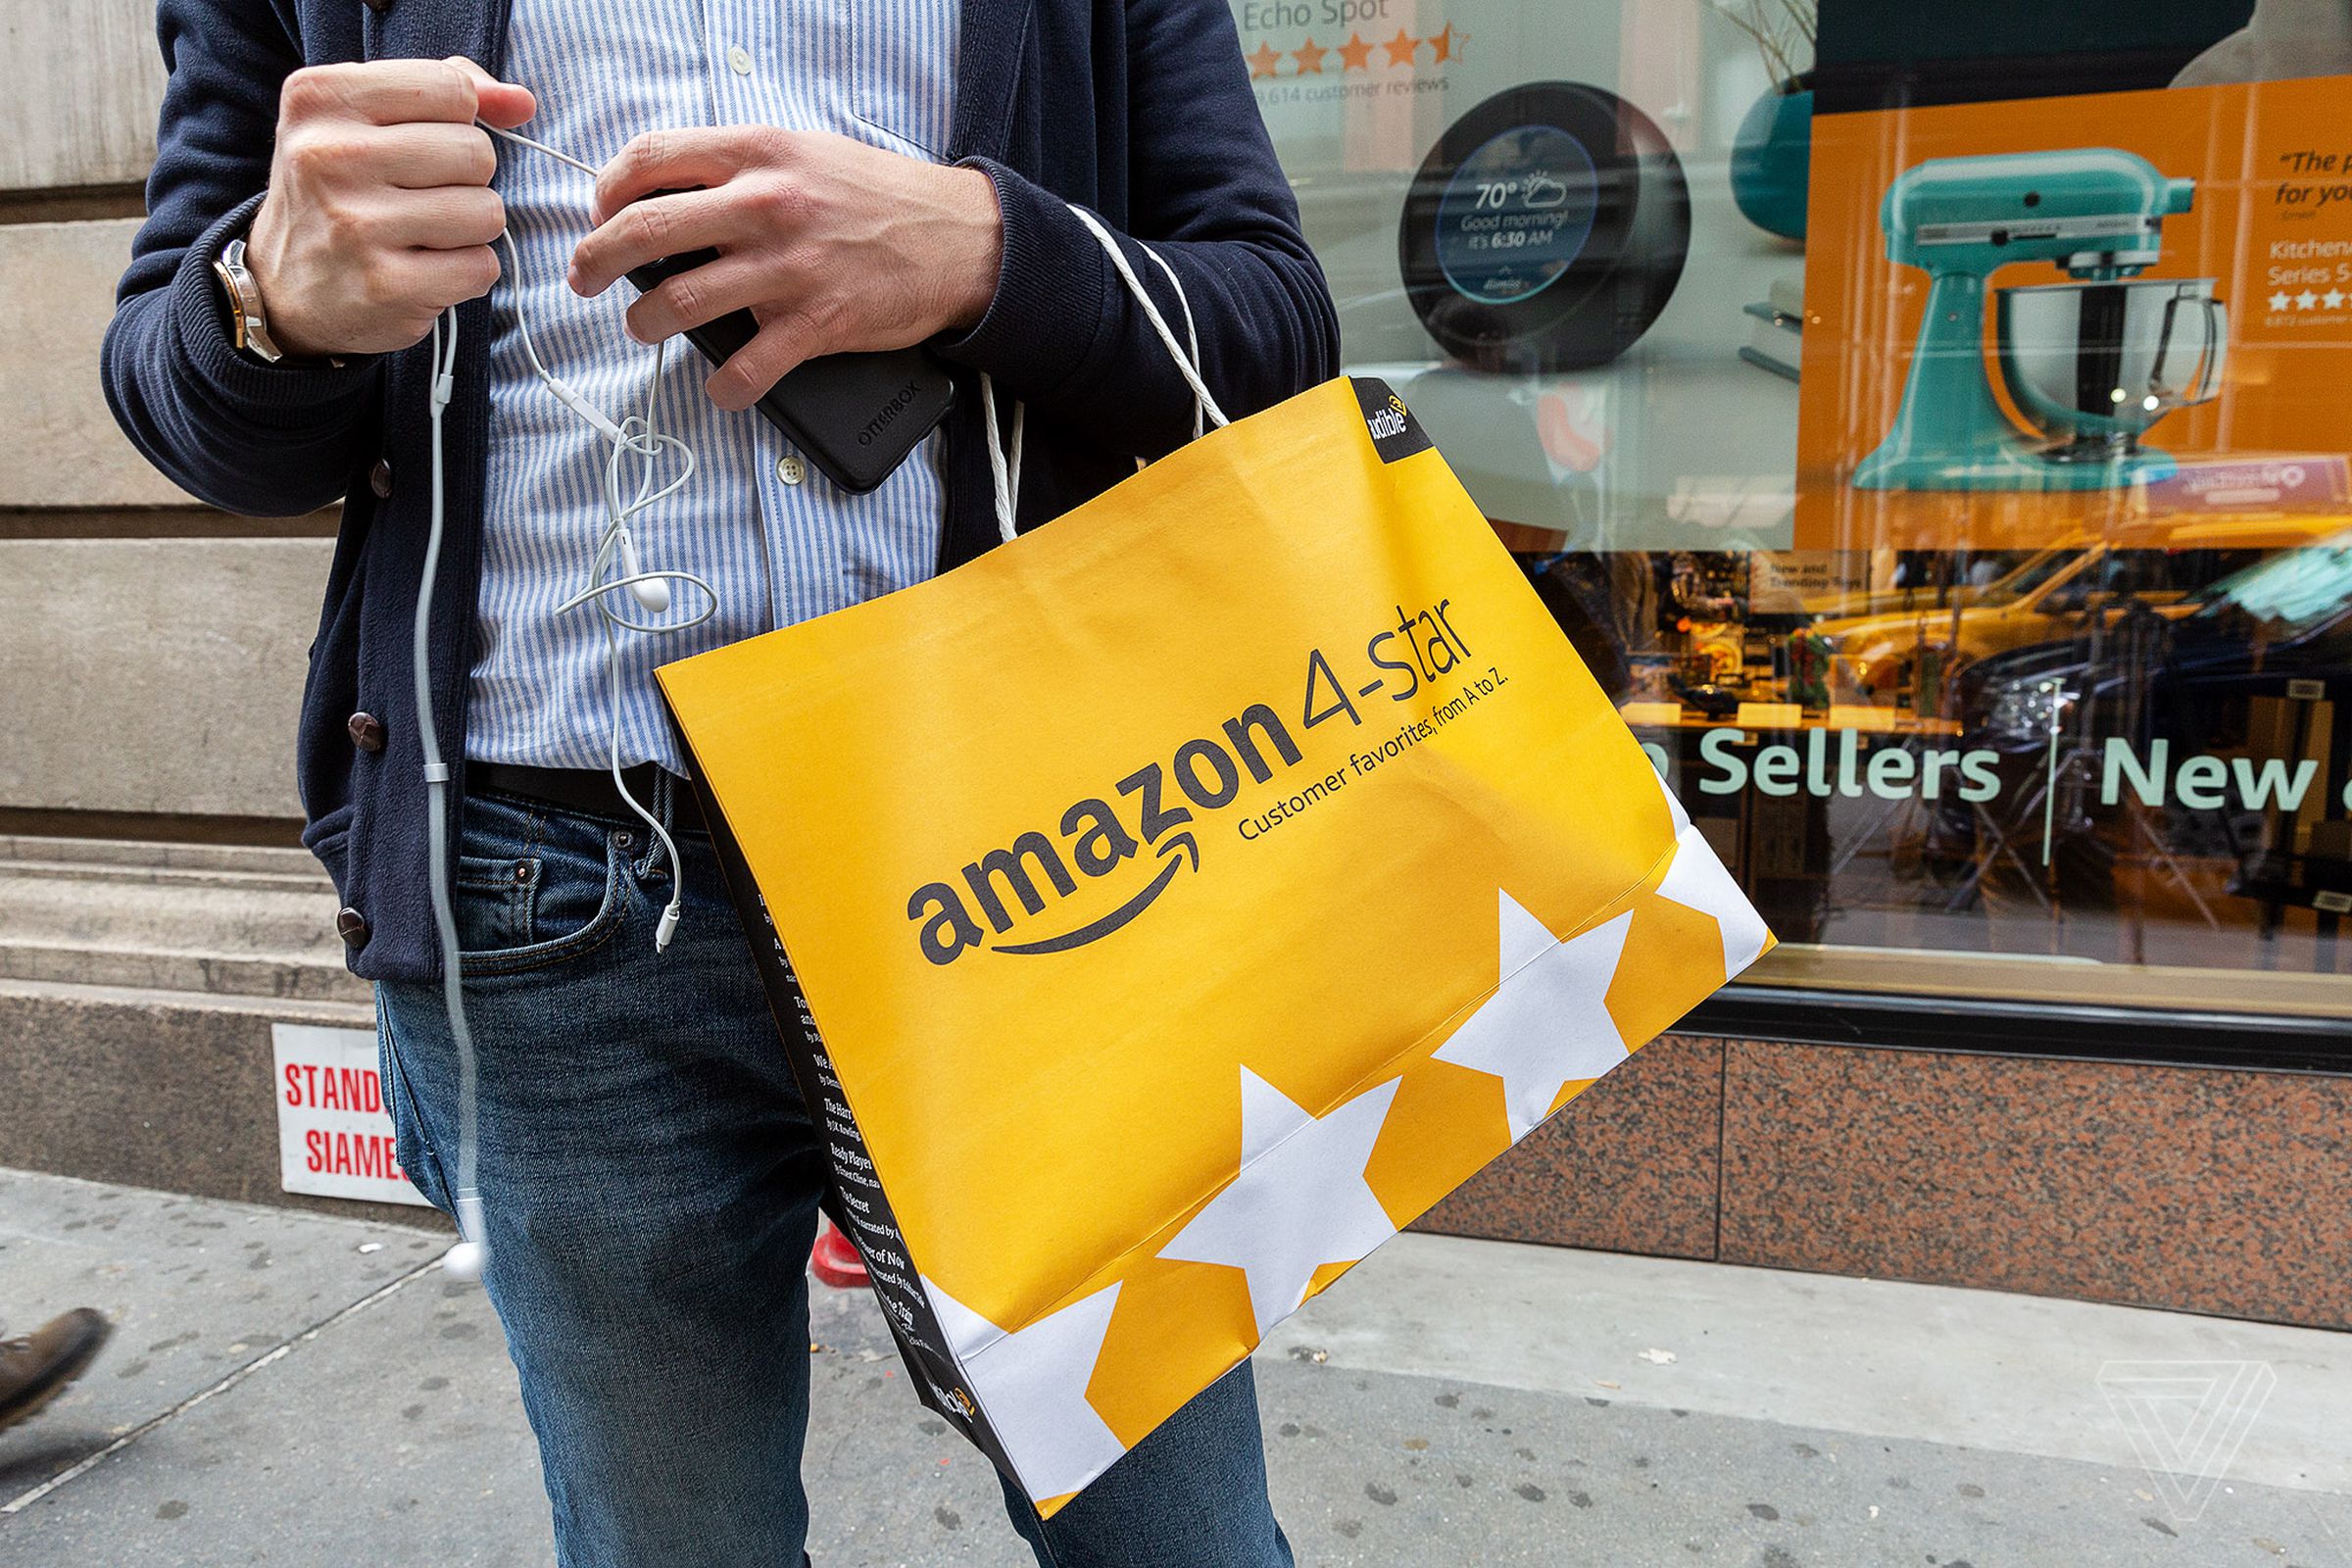 Opening day at the Amazon 4-Star brick and mortar store located in Soho in New York City. The cashless enterprise offers a variety of items that have been rated 4-stars or higher.